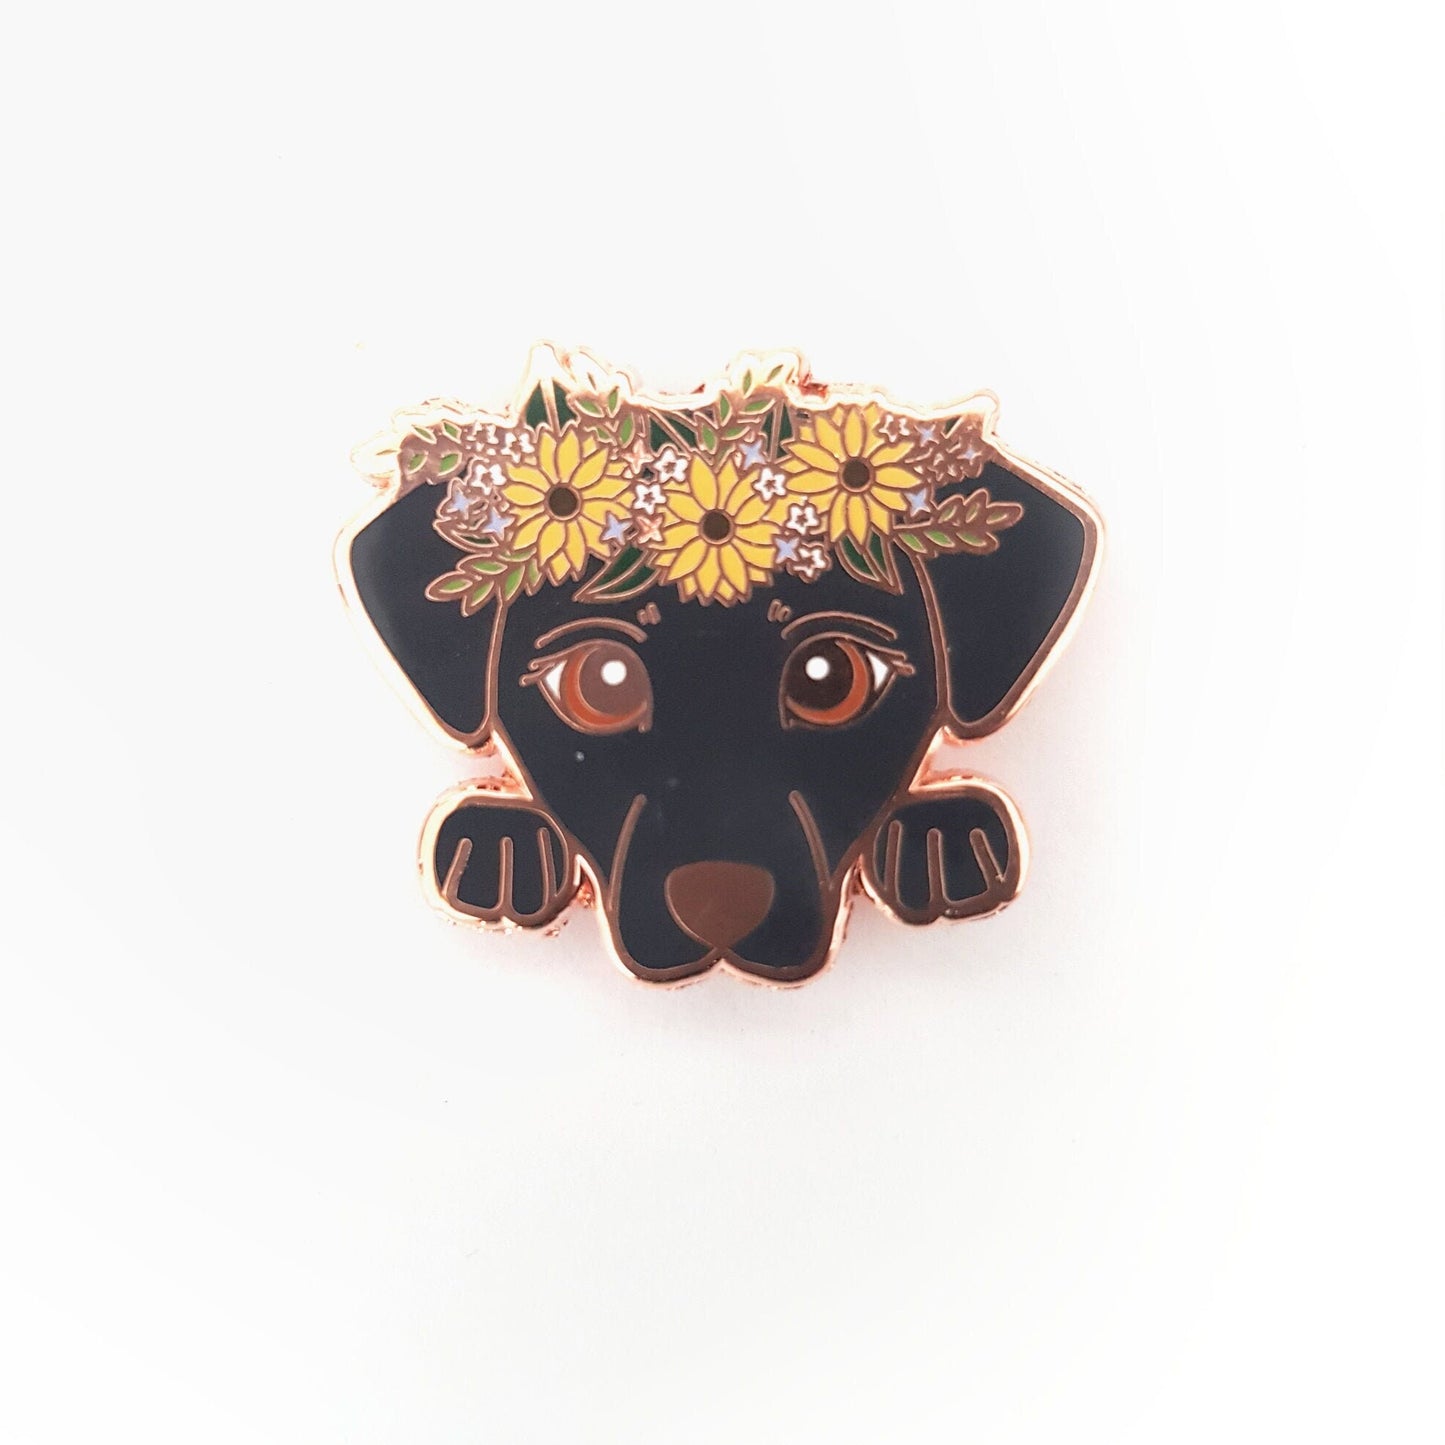 Labrador Pin, Black Lab with Sunflower Crown - Small 1&quot; Enamel Pin, Pins, Brooches & Lapel Pins